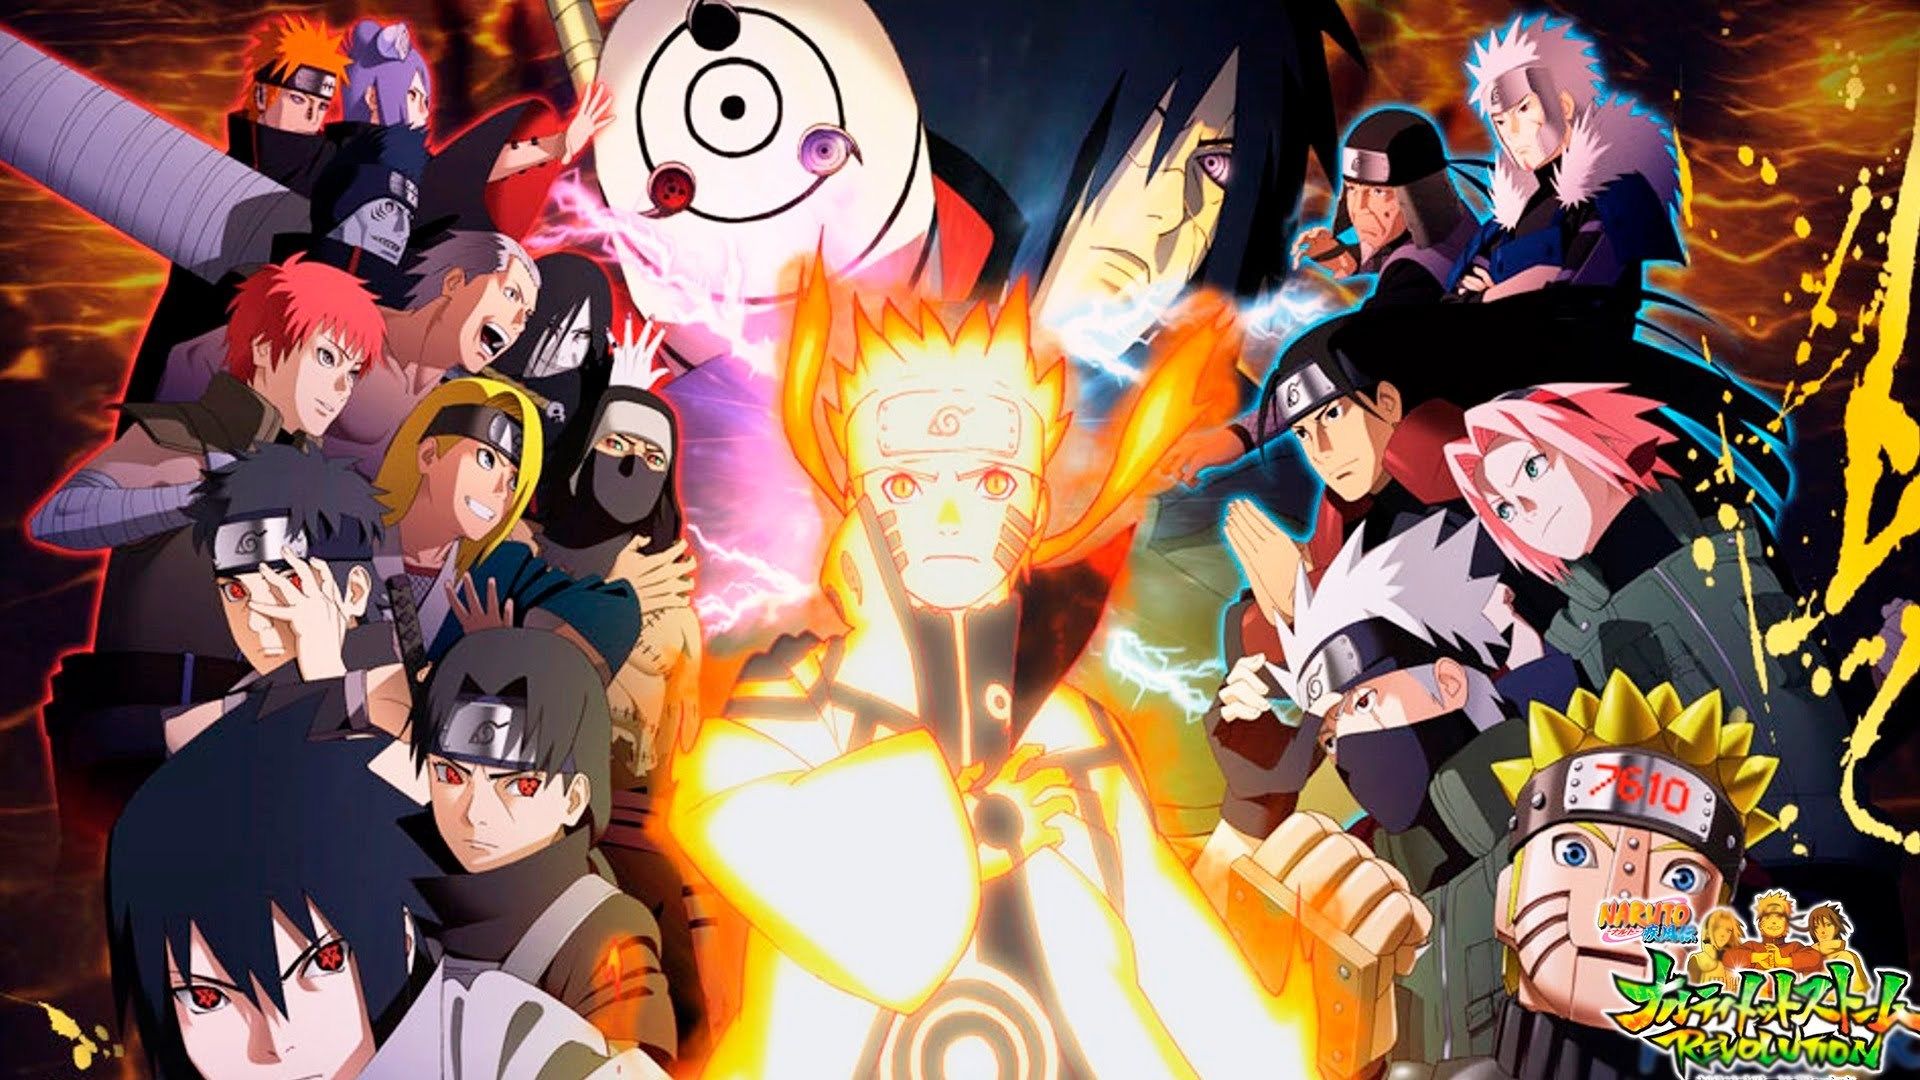 Looking for the perfect Naruto wallpaper for your computer? Look no further than WallpaperSafari. With over 69 options to choose from, you\'re bound to find one that speaks to you. Transform your desktop into a true Naruto haven.